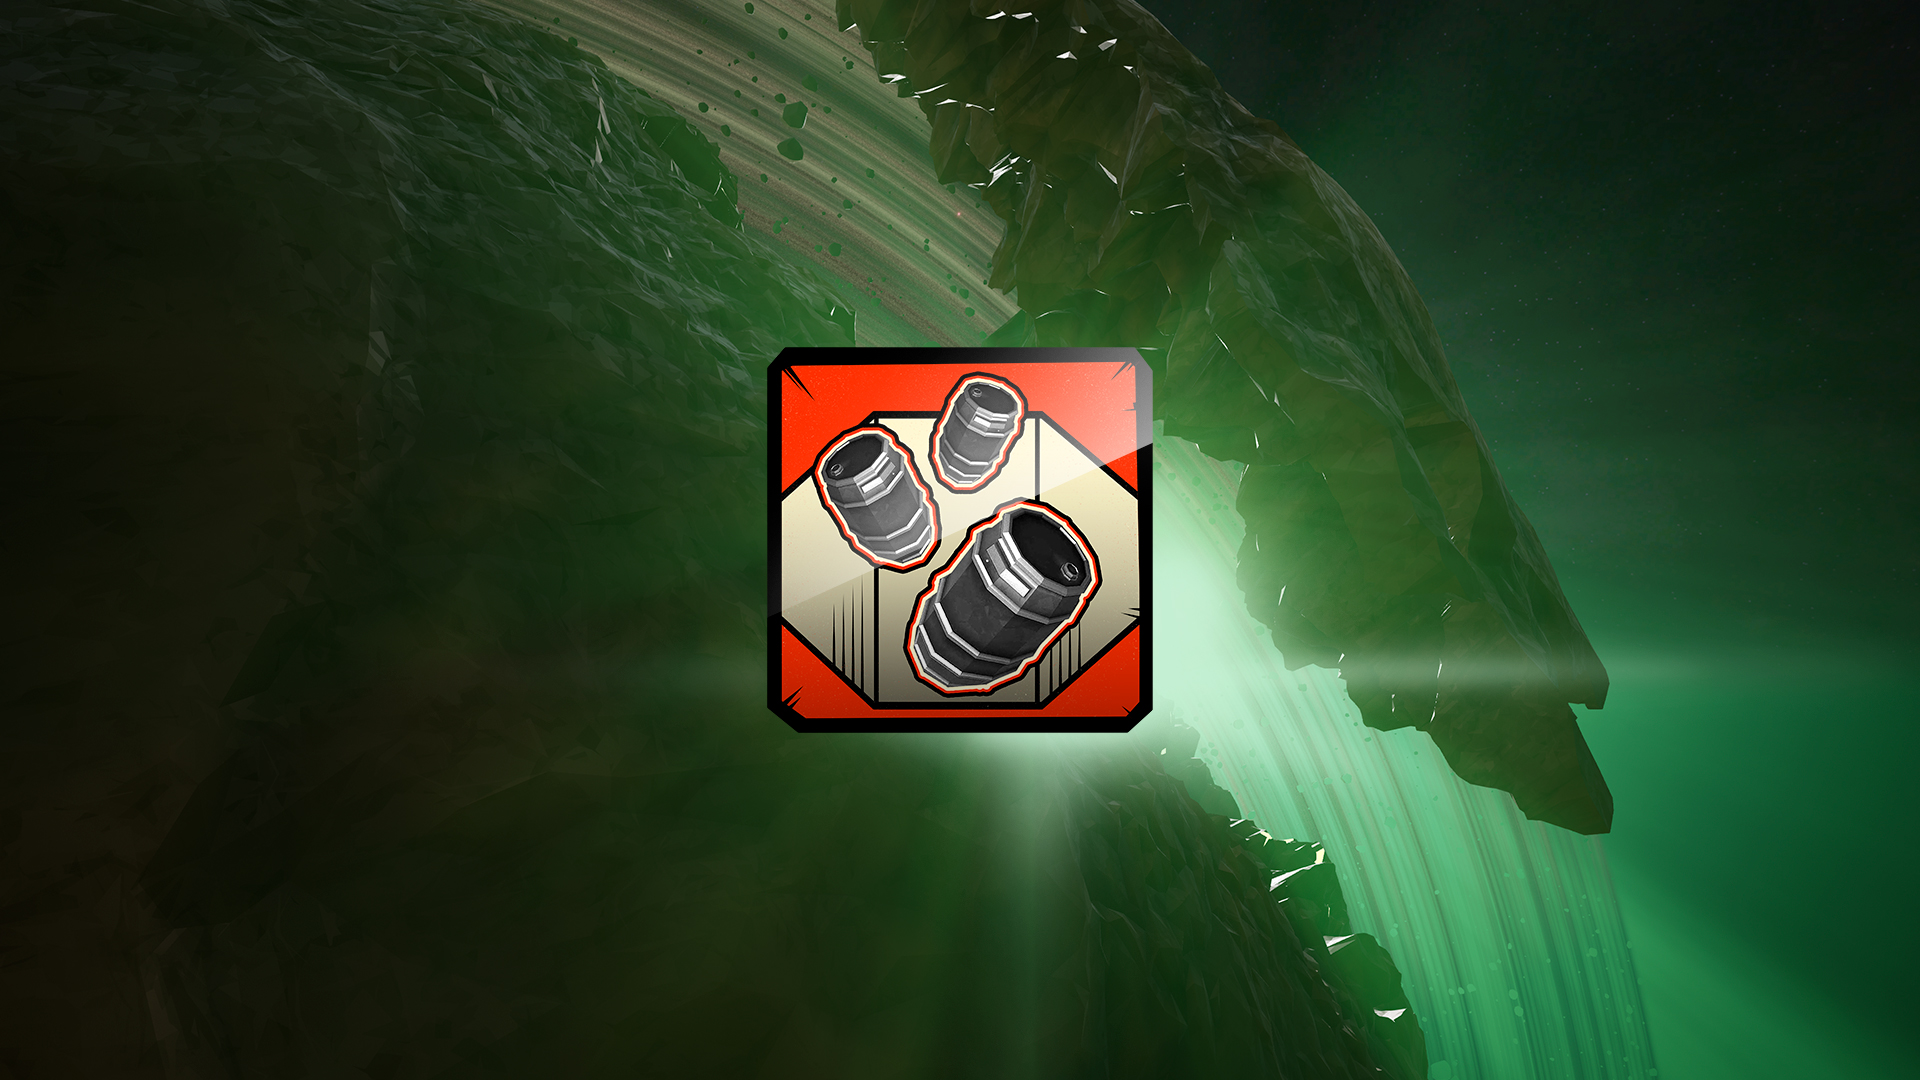 Icon for Foreign Objects In The Launch Bay